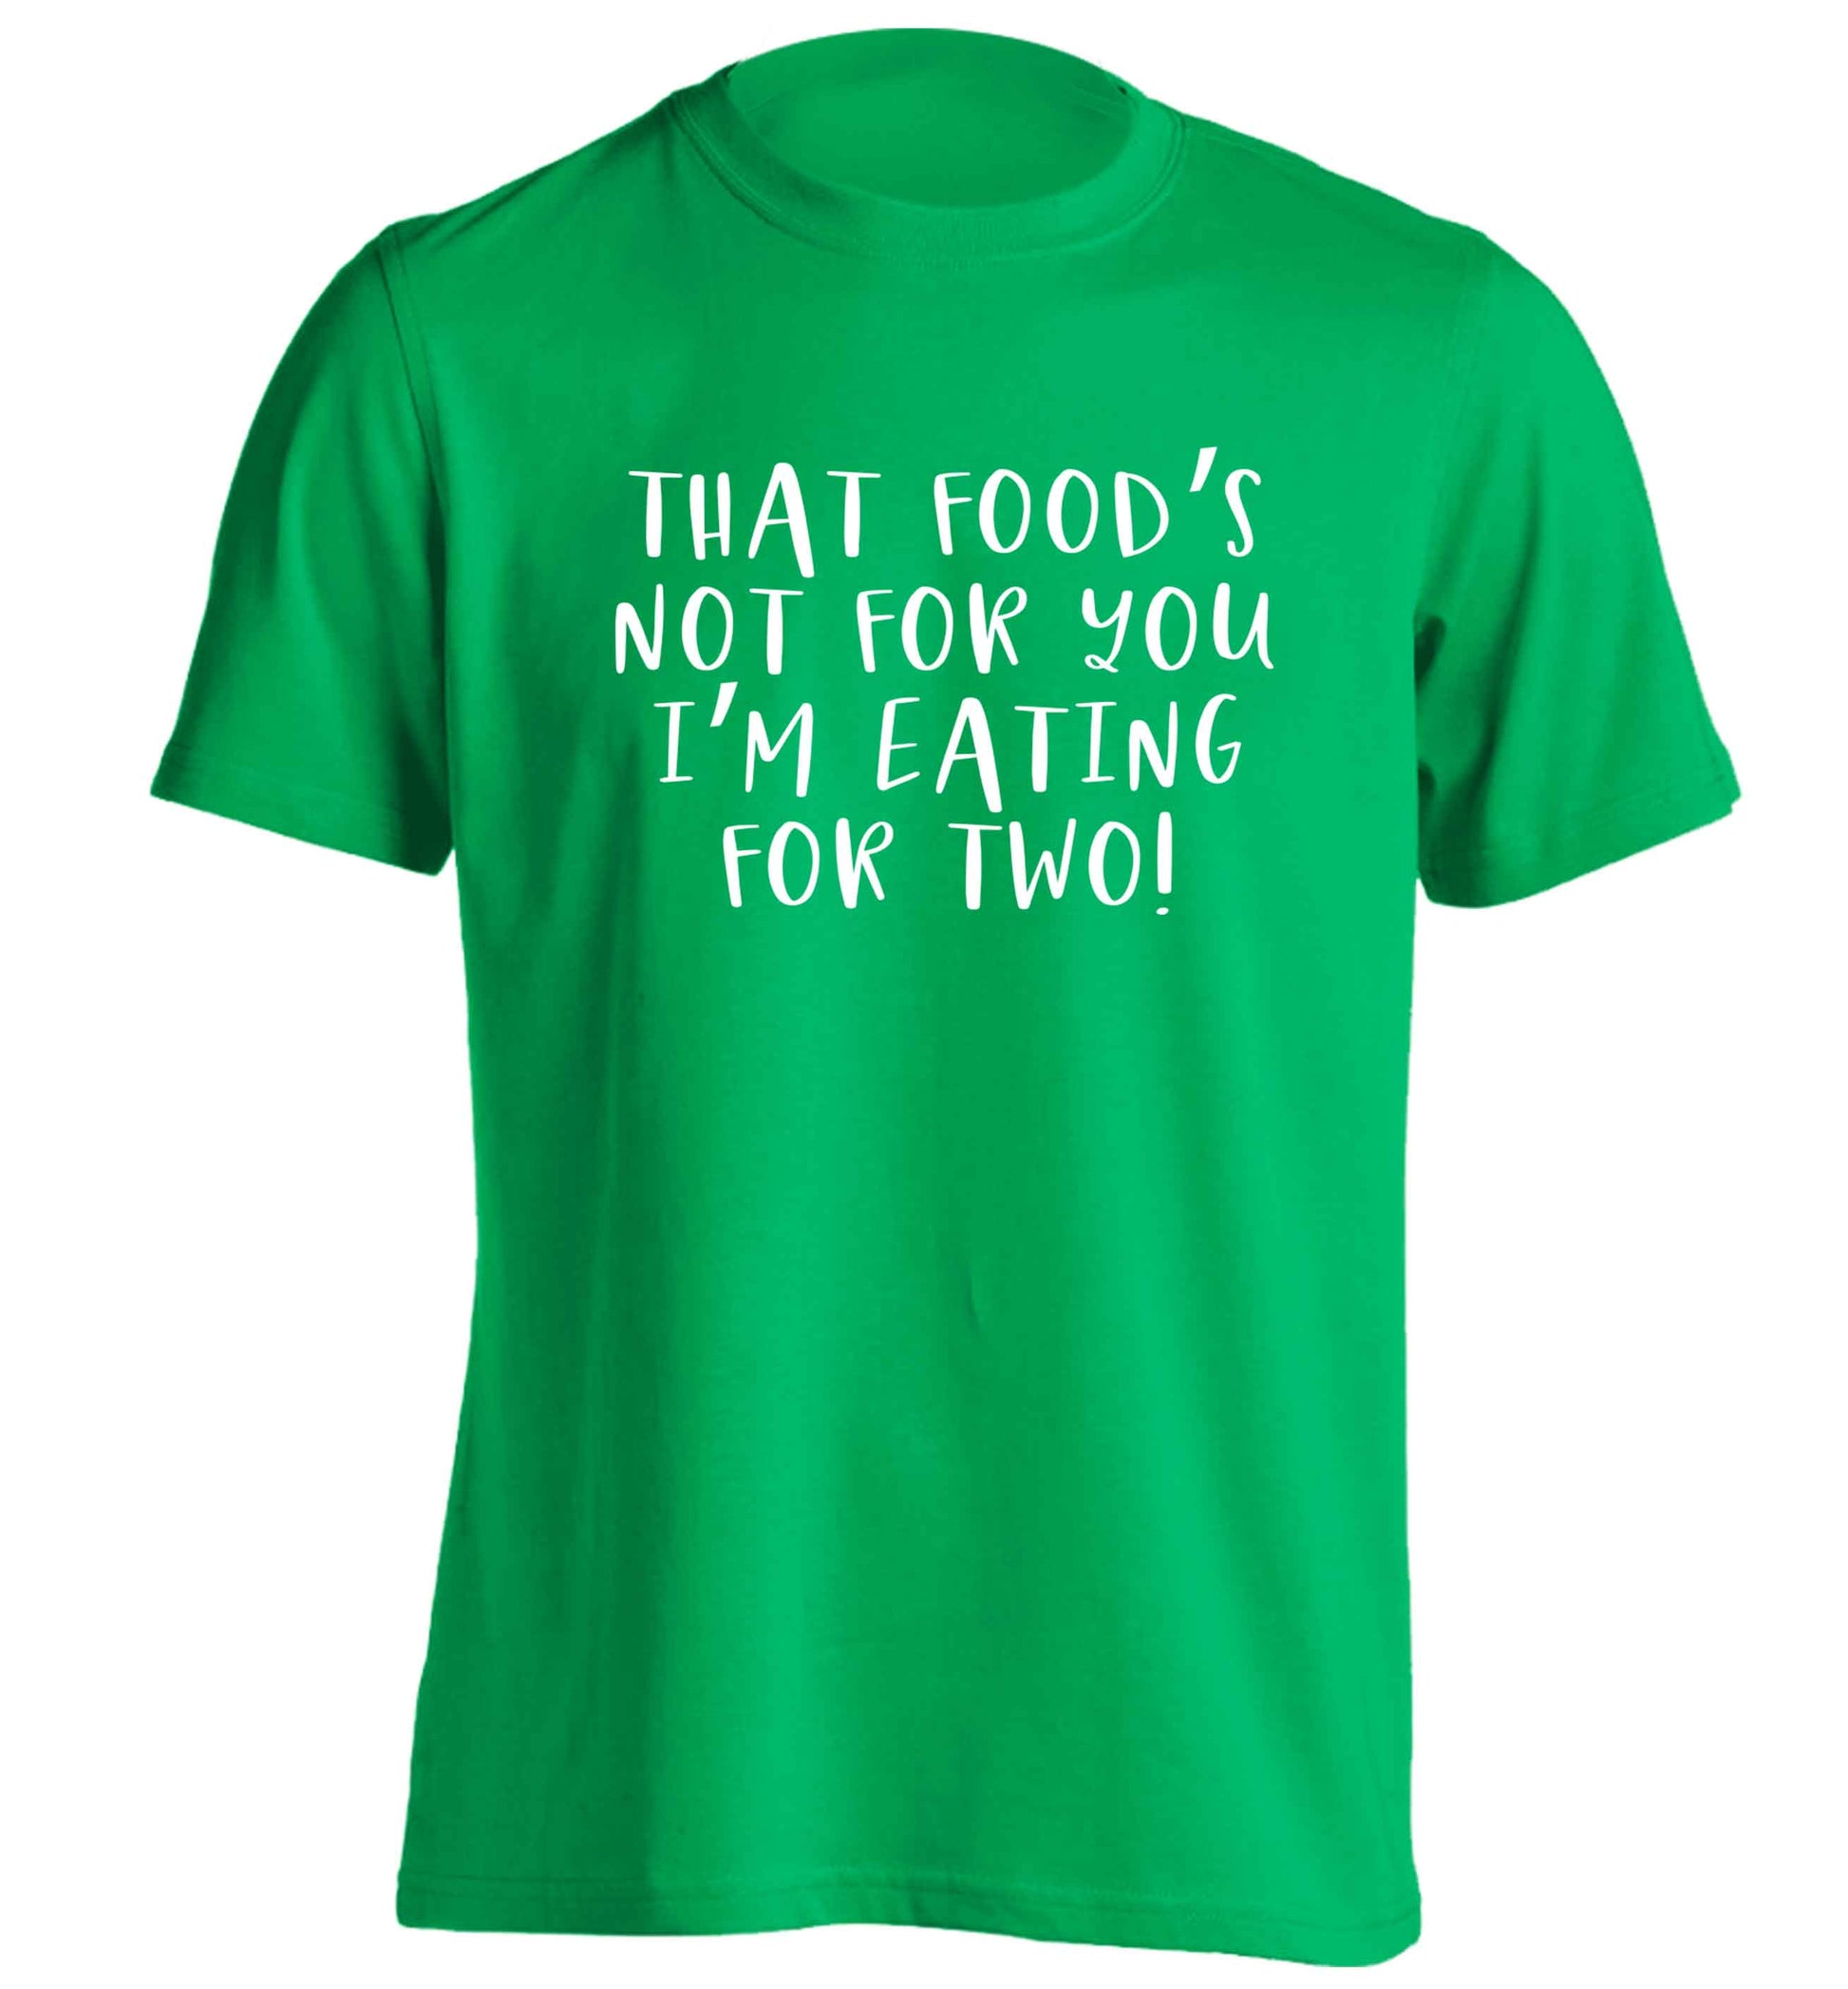 That food's not for you I'm eating for two adults unisex green Tshirt 2XL